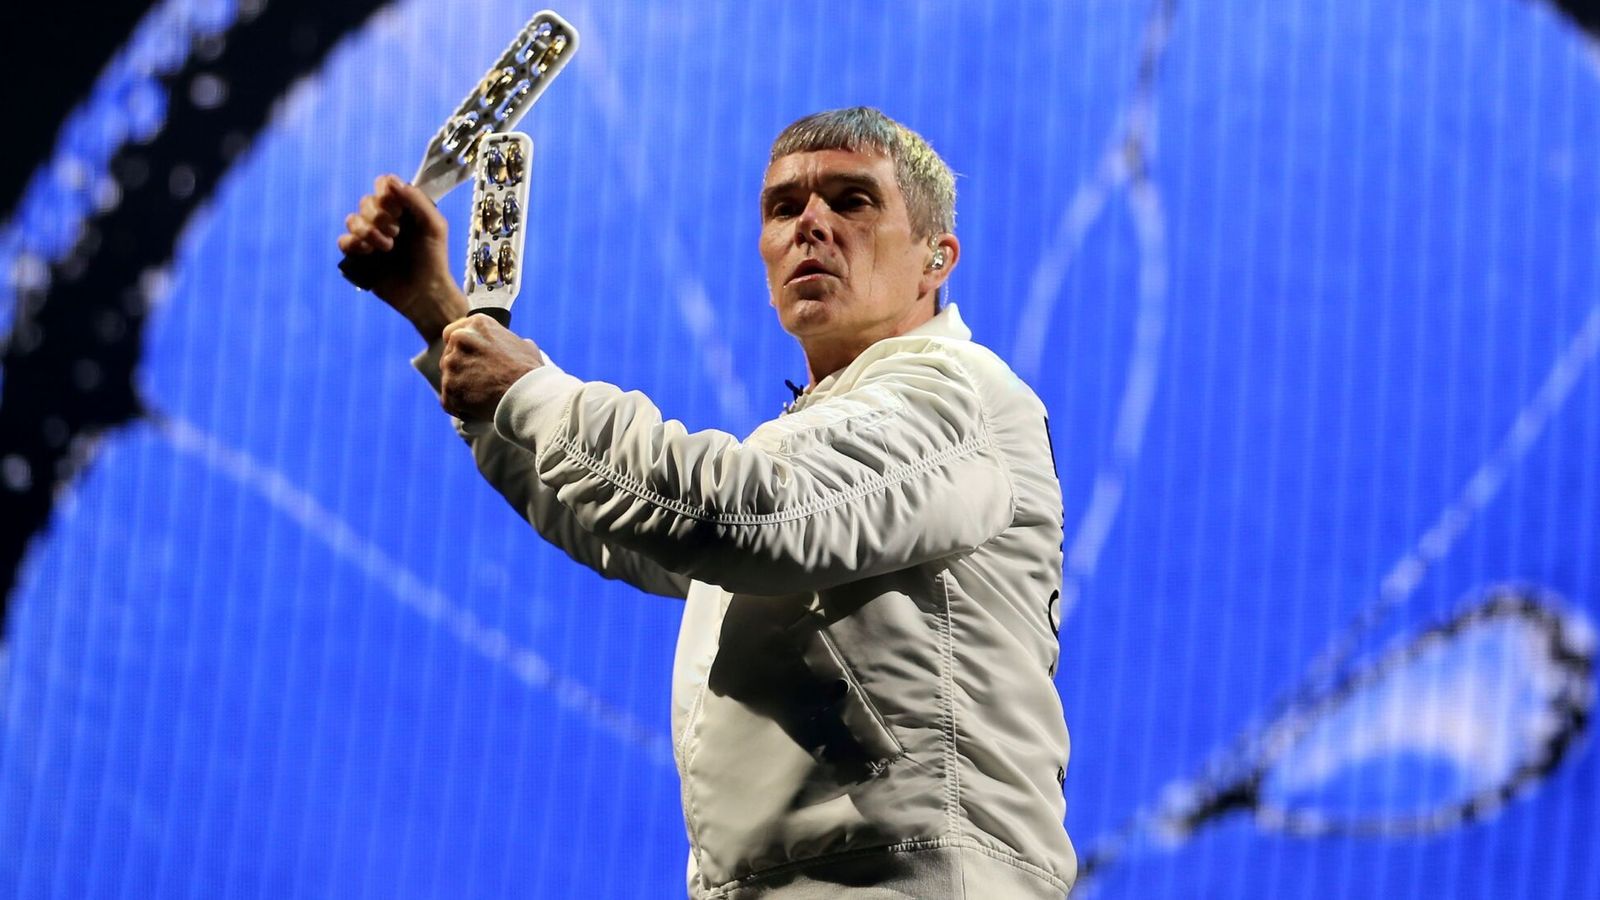 Stone Roses: Singer Ian Brown leads tributes to Pete Garner after band's original bassist dies aged 61